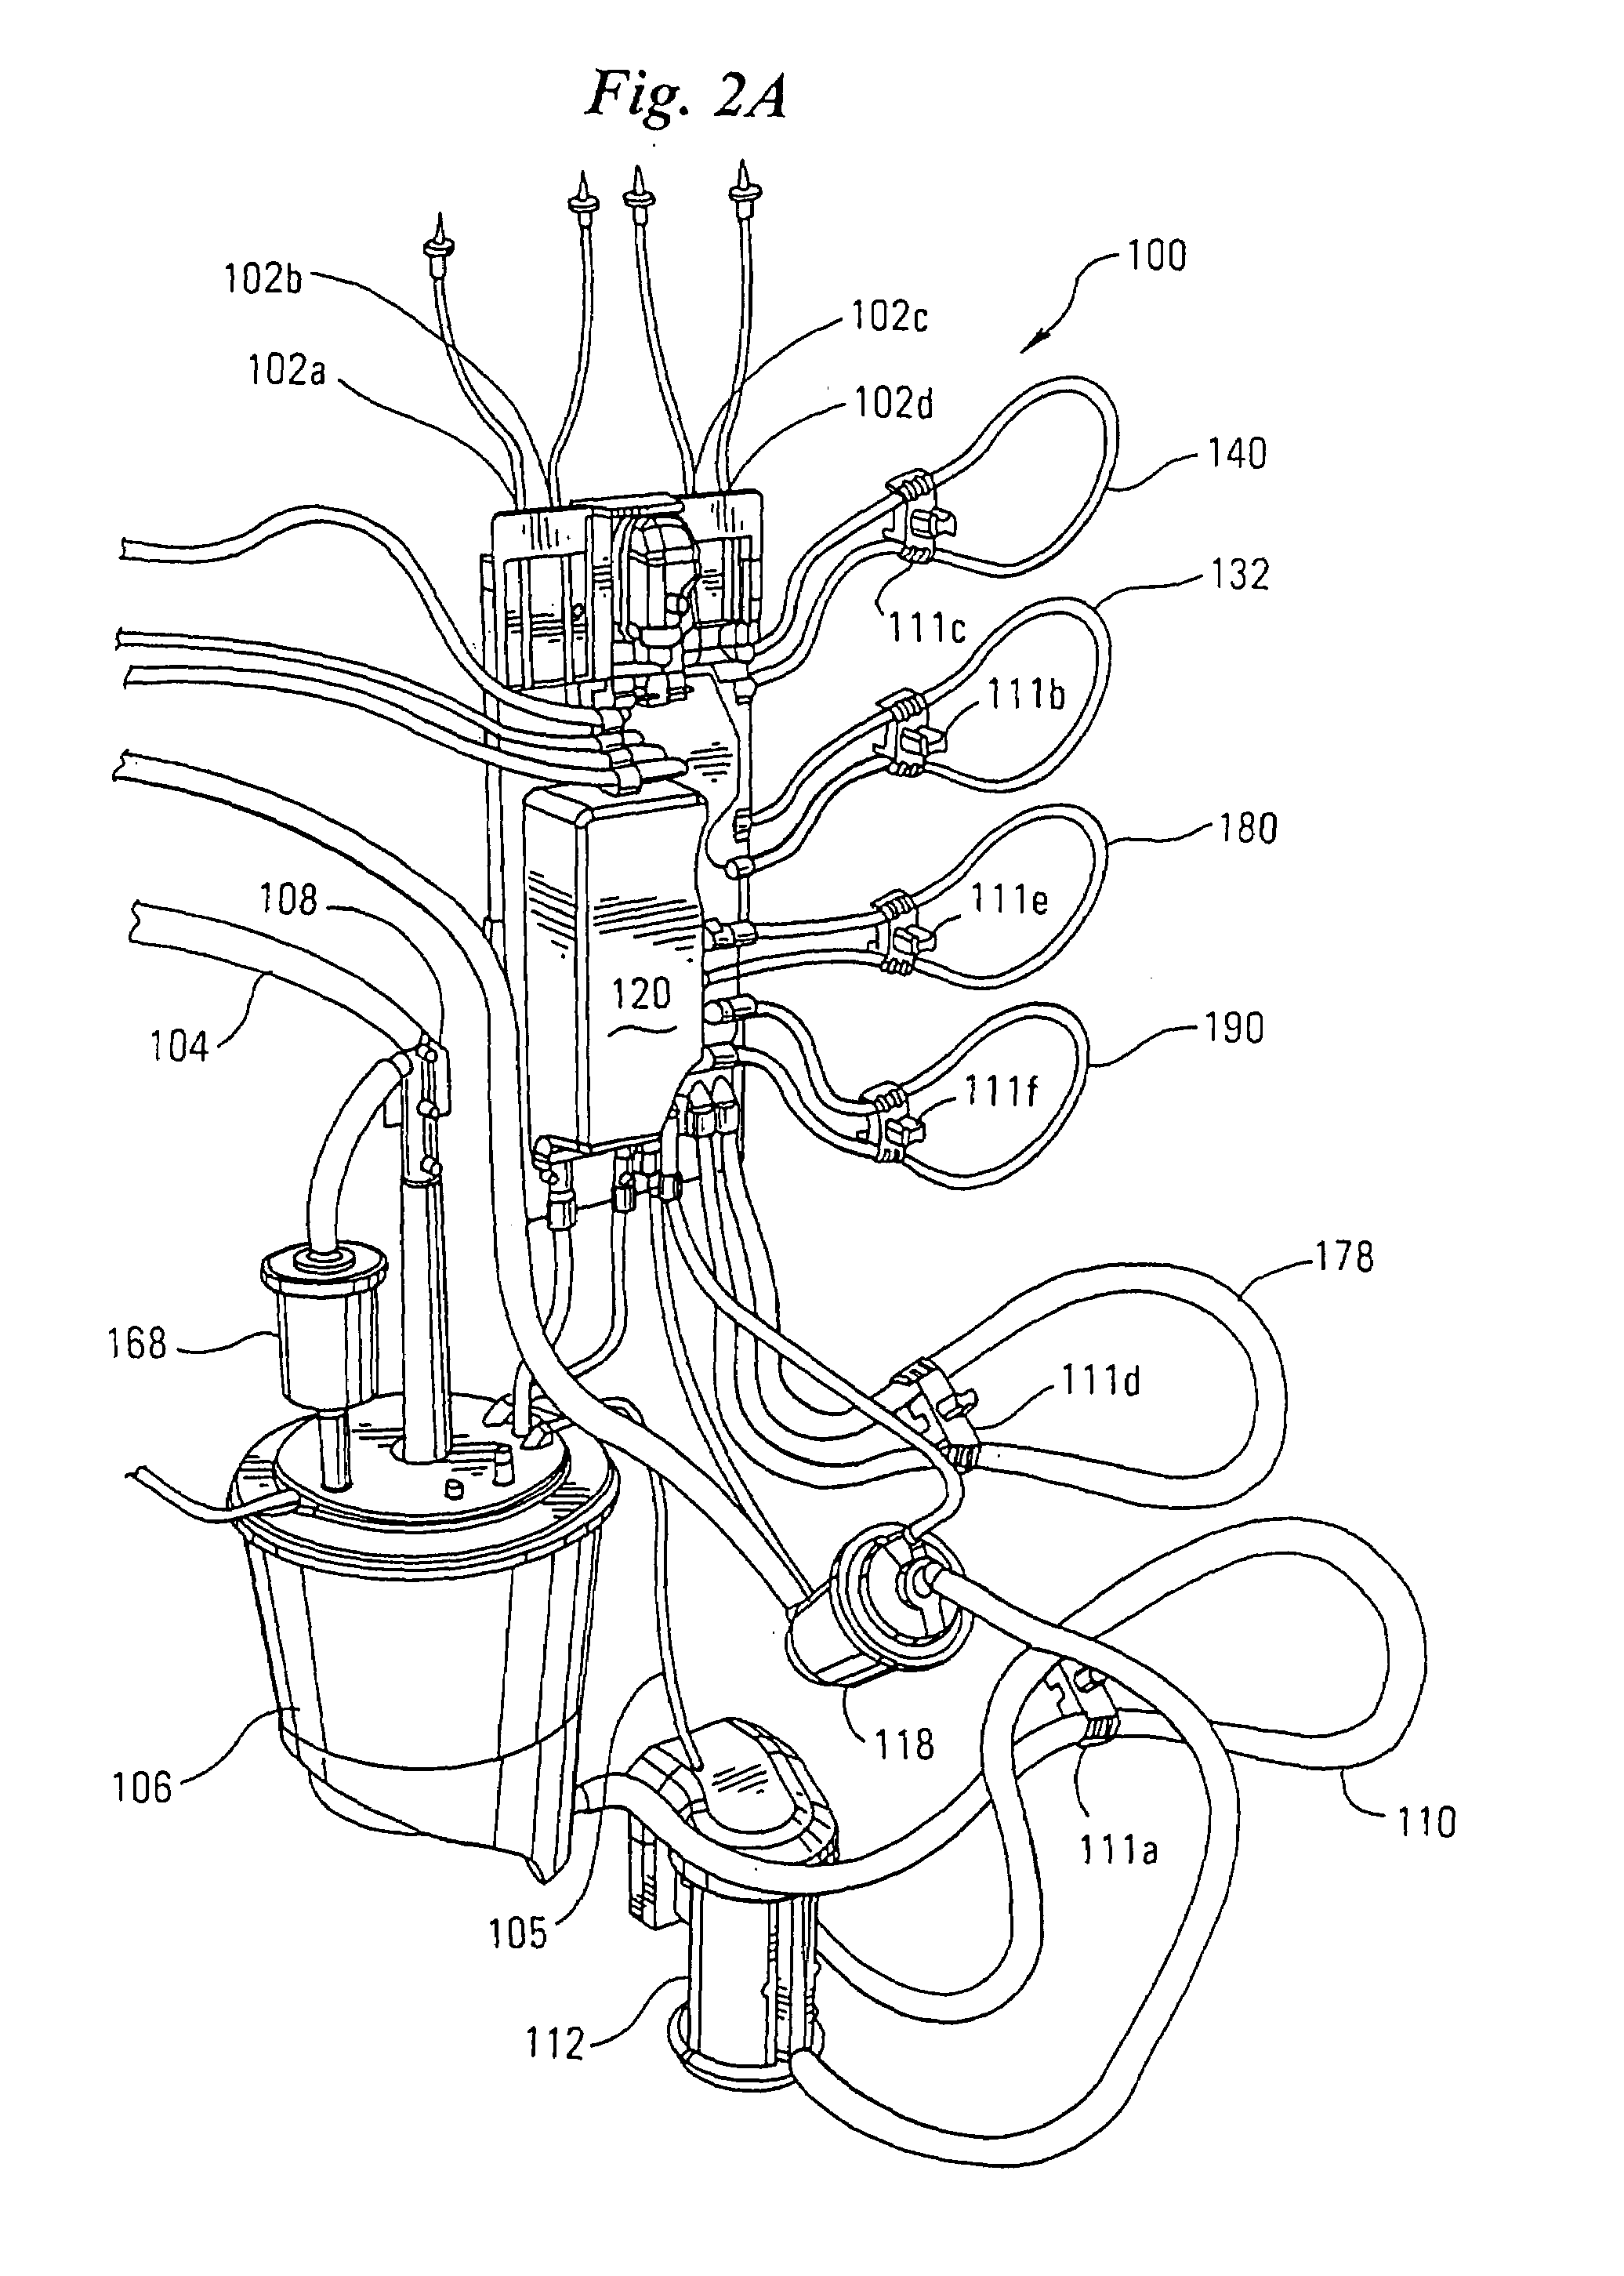 Disposable cartridge for a blood perfusion system